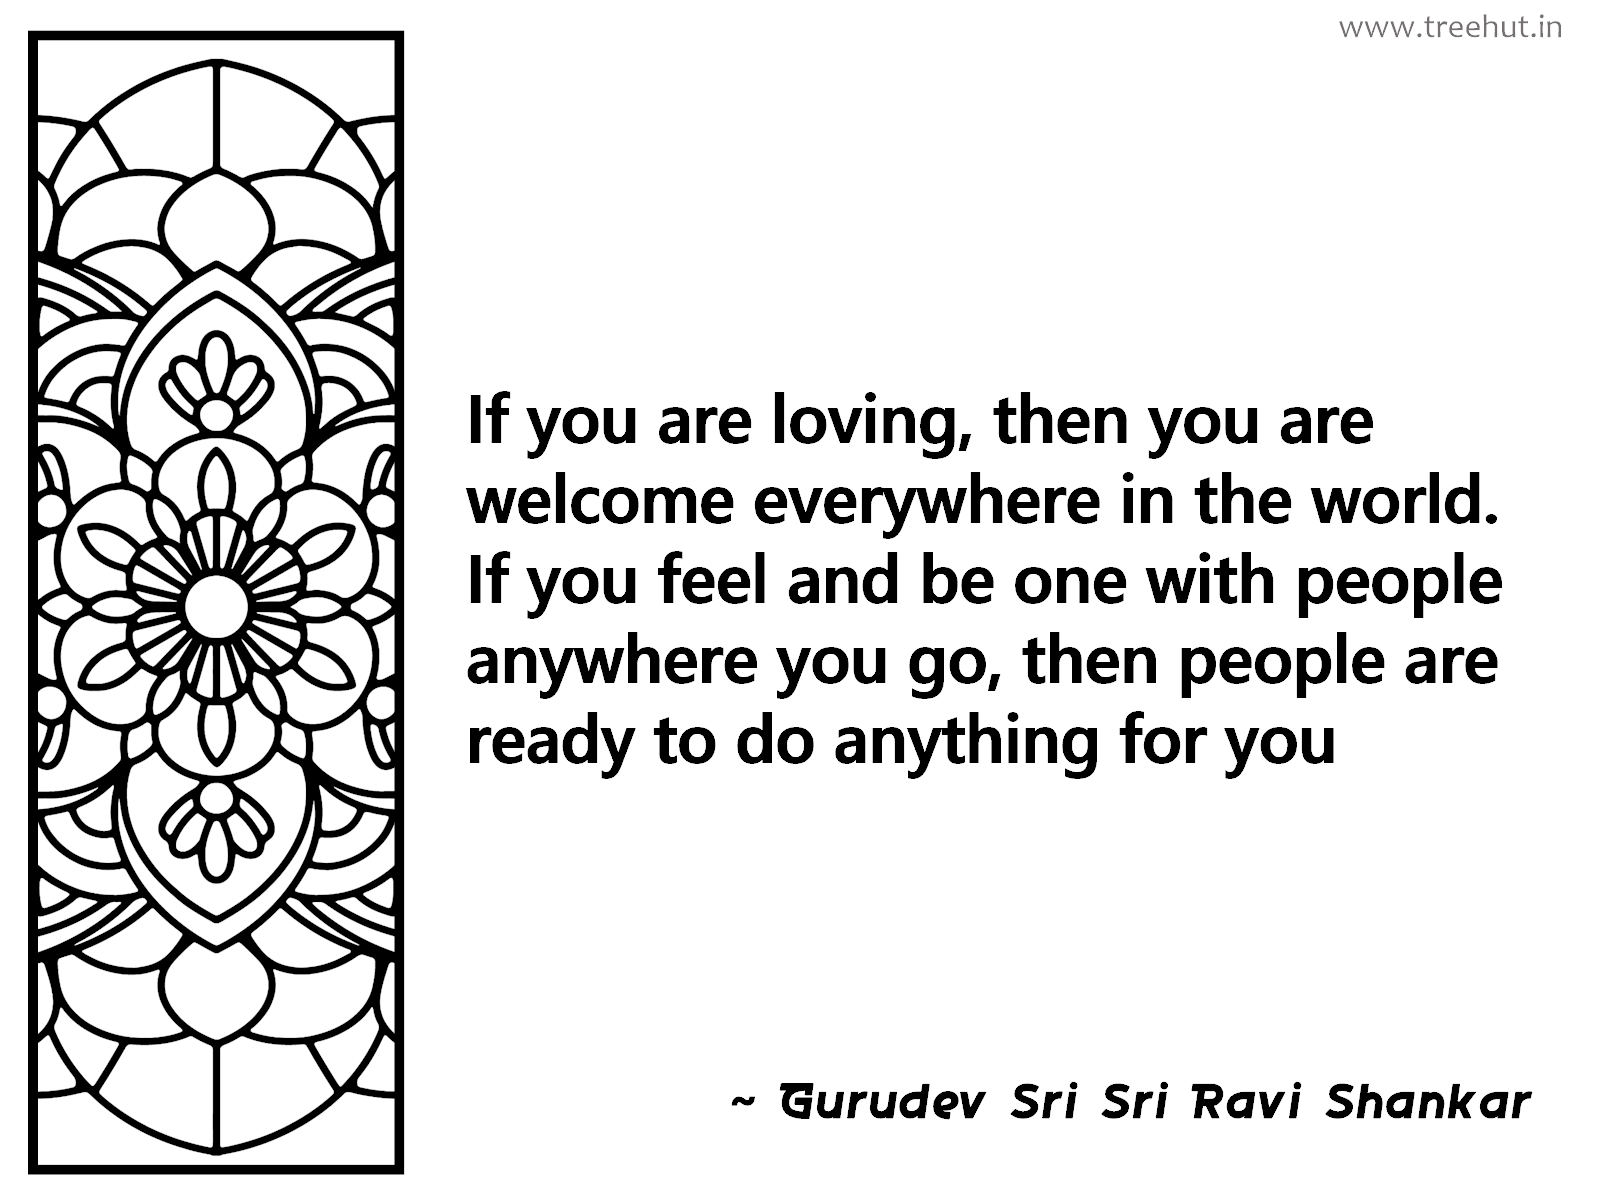 If you are loving, then you are welcome everywhere in the world. If you feel and be one with people anywhere you go, then people are ready to do anything for you Inspirational Quote by Gurudev Sri Sri Ravi Shankar, coloring pages